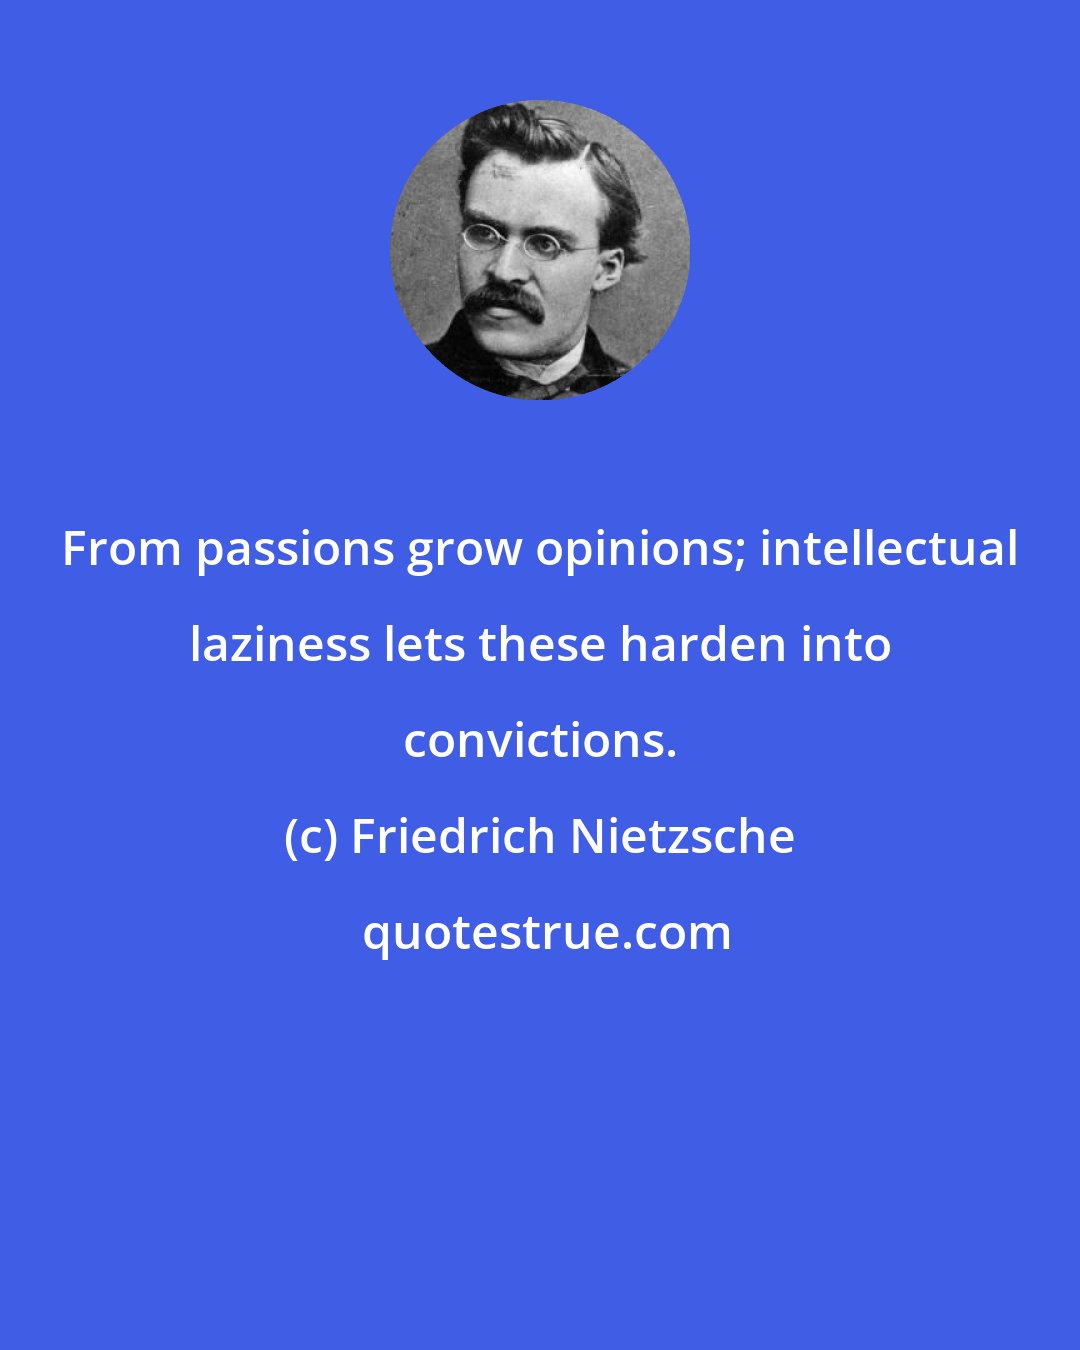 Friedrich Nietzsche: From passions grow opinions; intellectual laziness lets these harden into convictions.